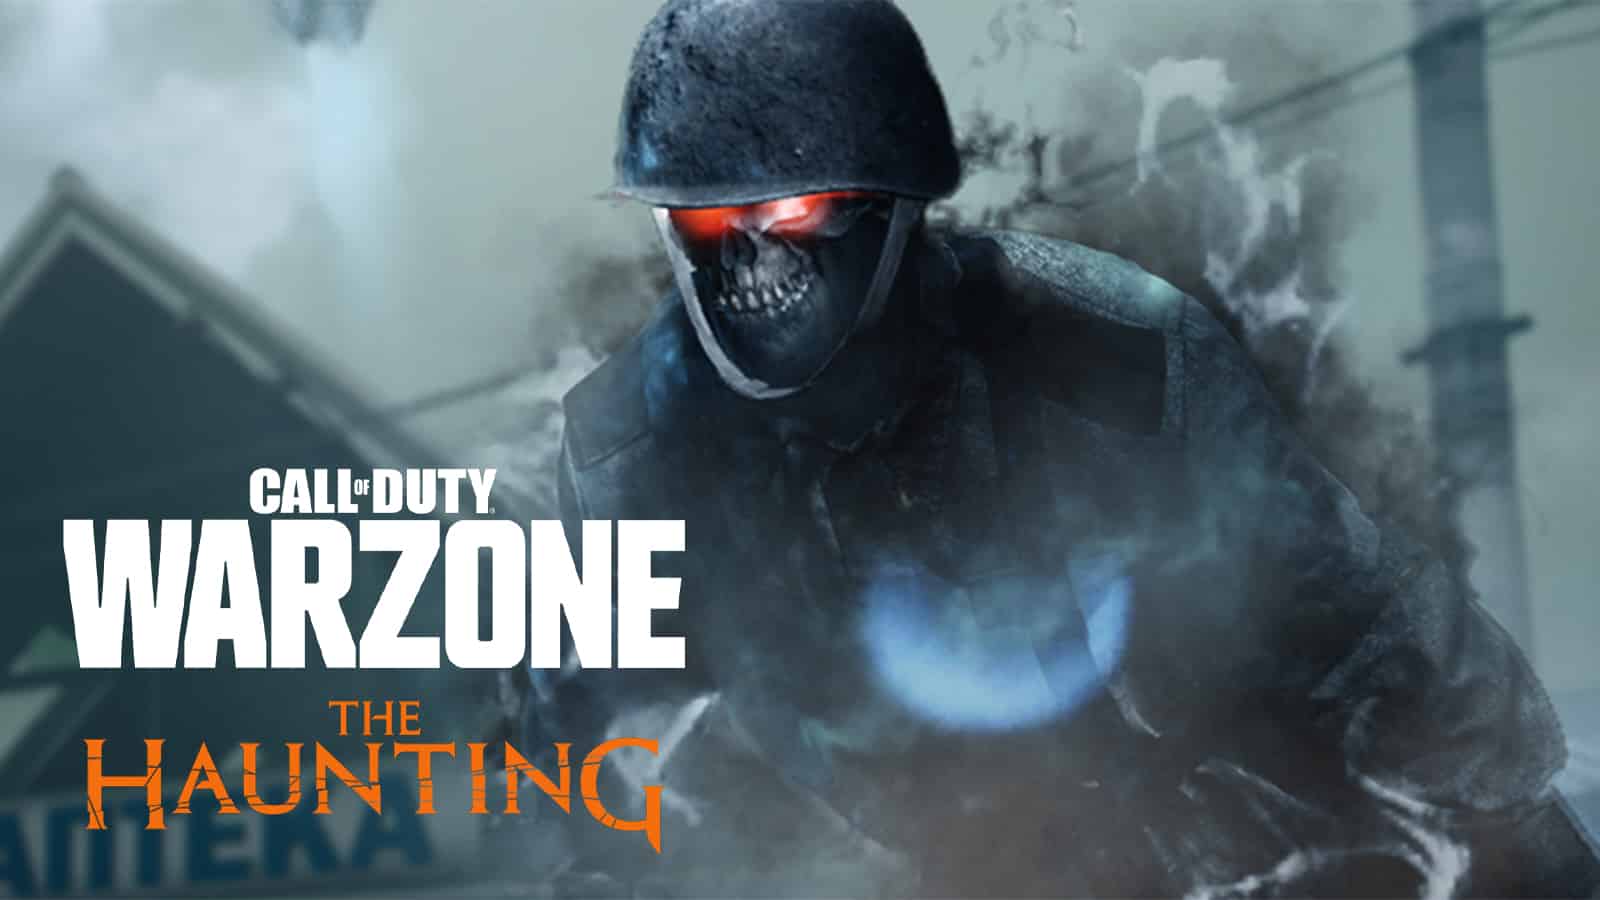 Black Ops Cold War The Haunting gameplay